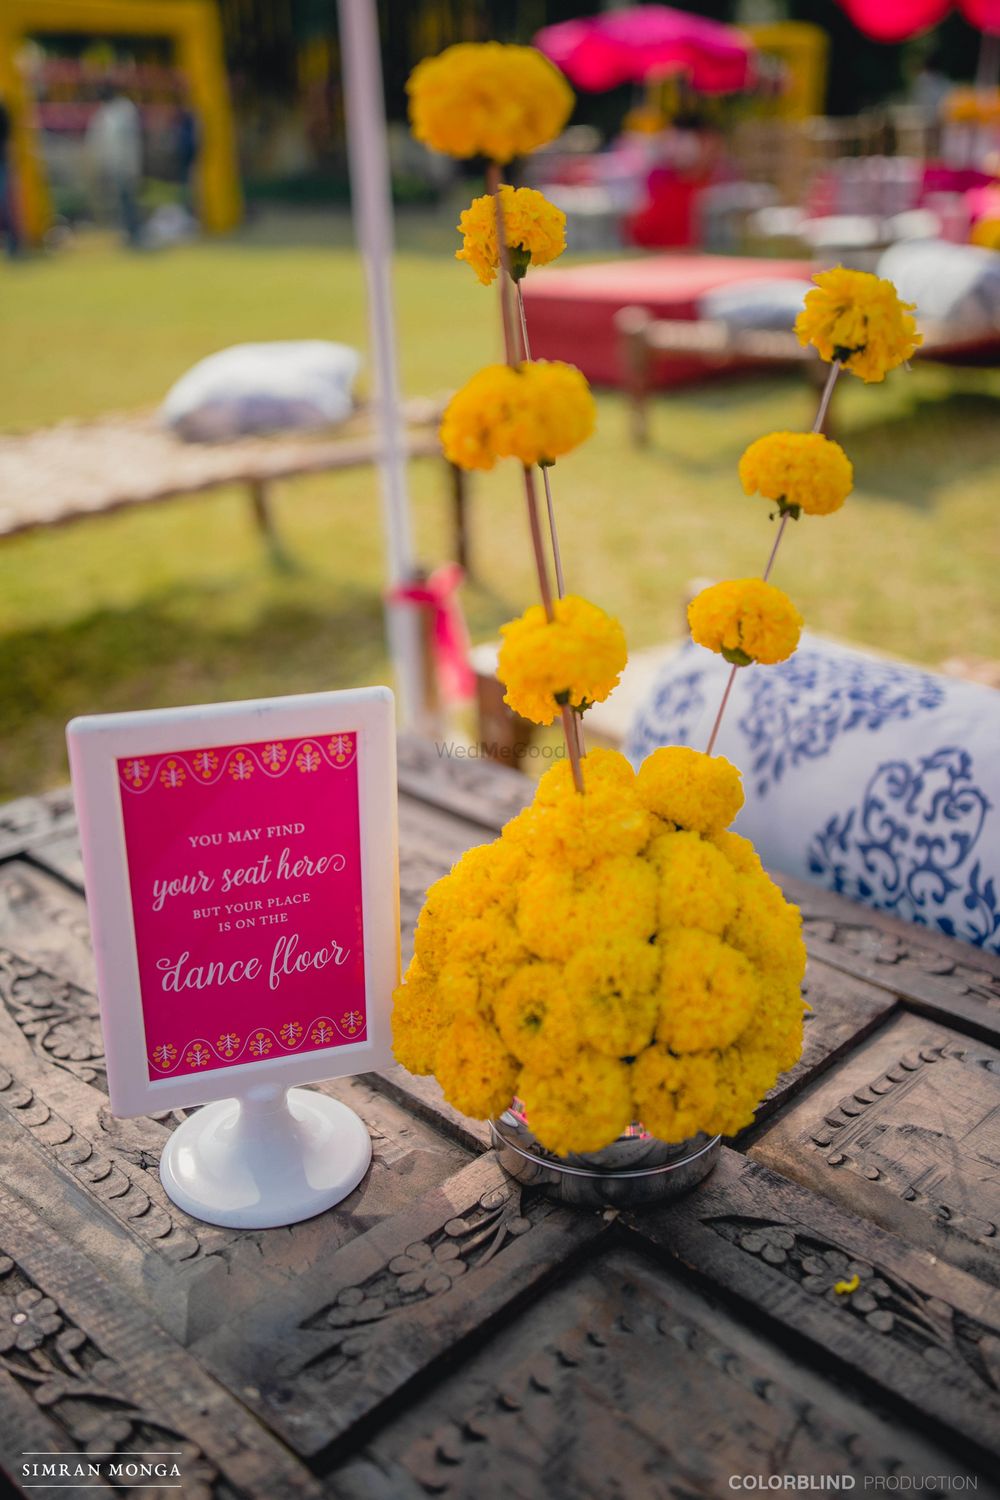 Photo of Mehendi table setting with floral centerpiece and dance floor sign